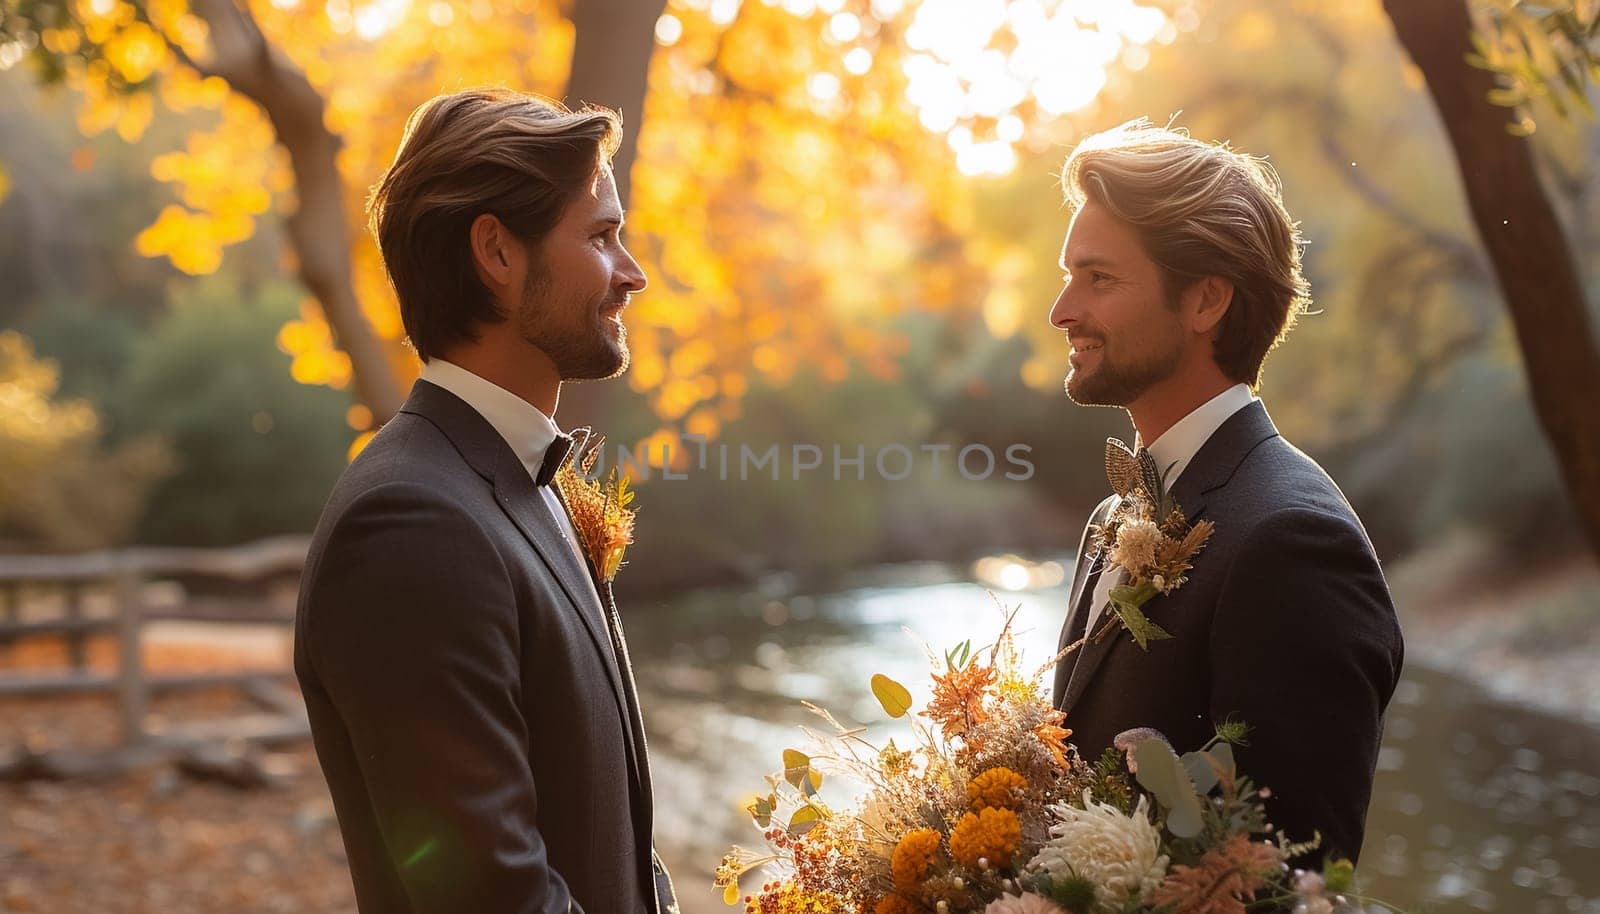 The wedding of two gay men. High quality photo